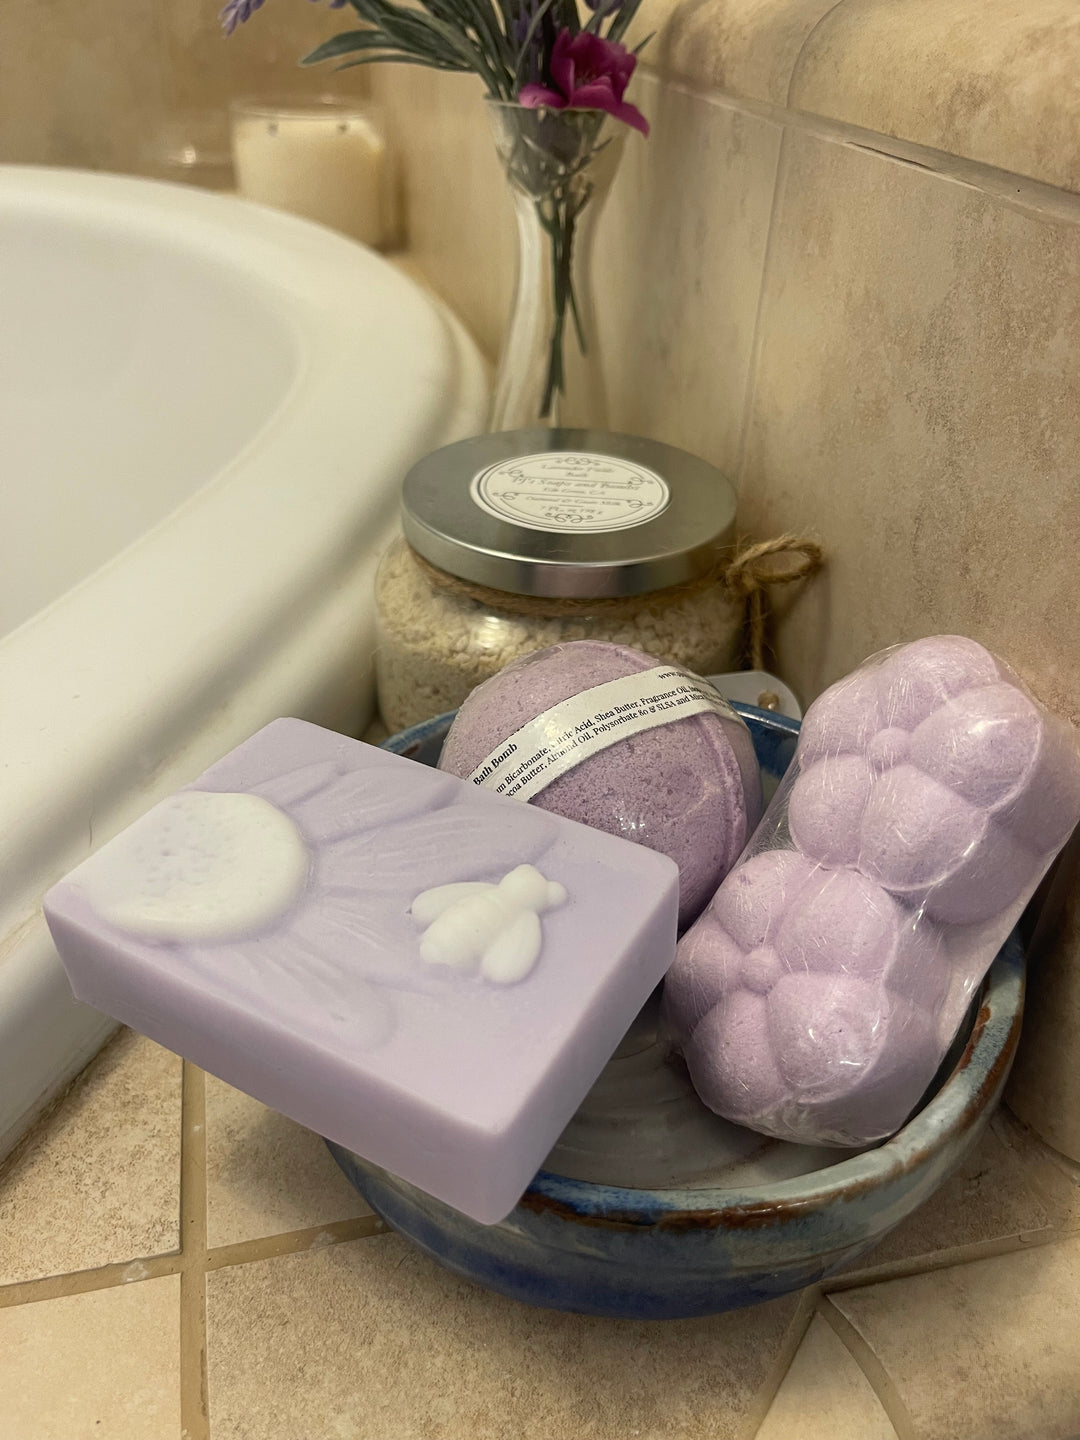 Shower Steamers, Fields of Lavender Scent, Aromatherapy, Spa Like